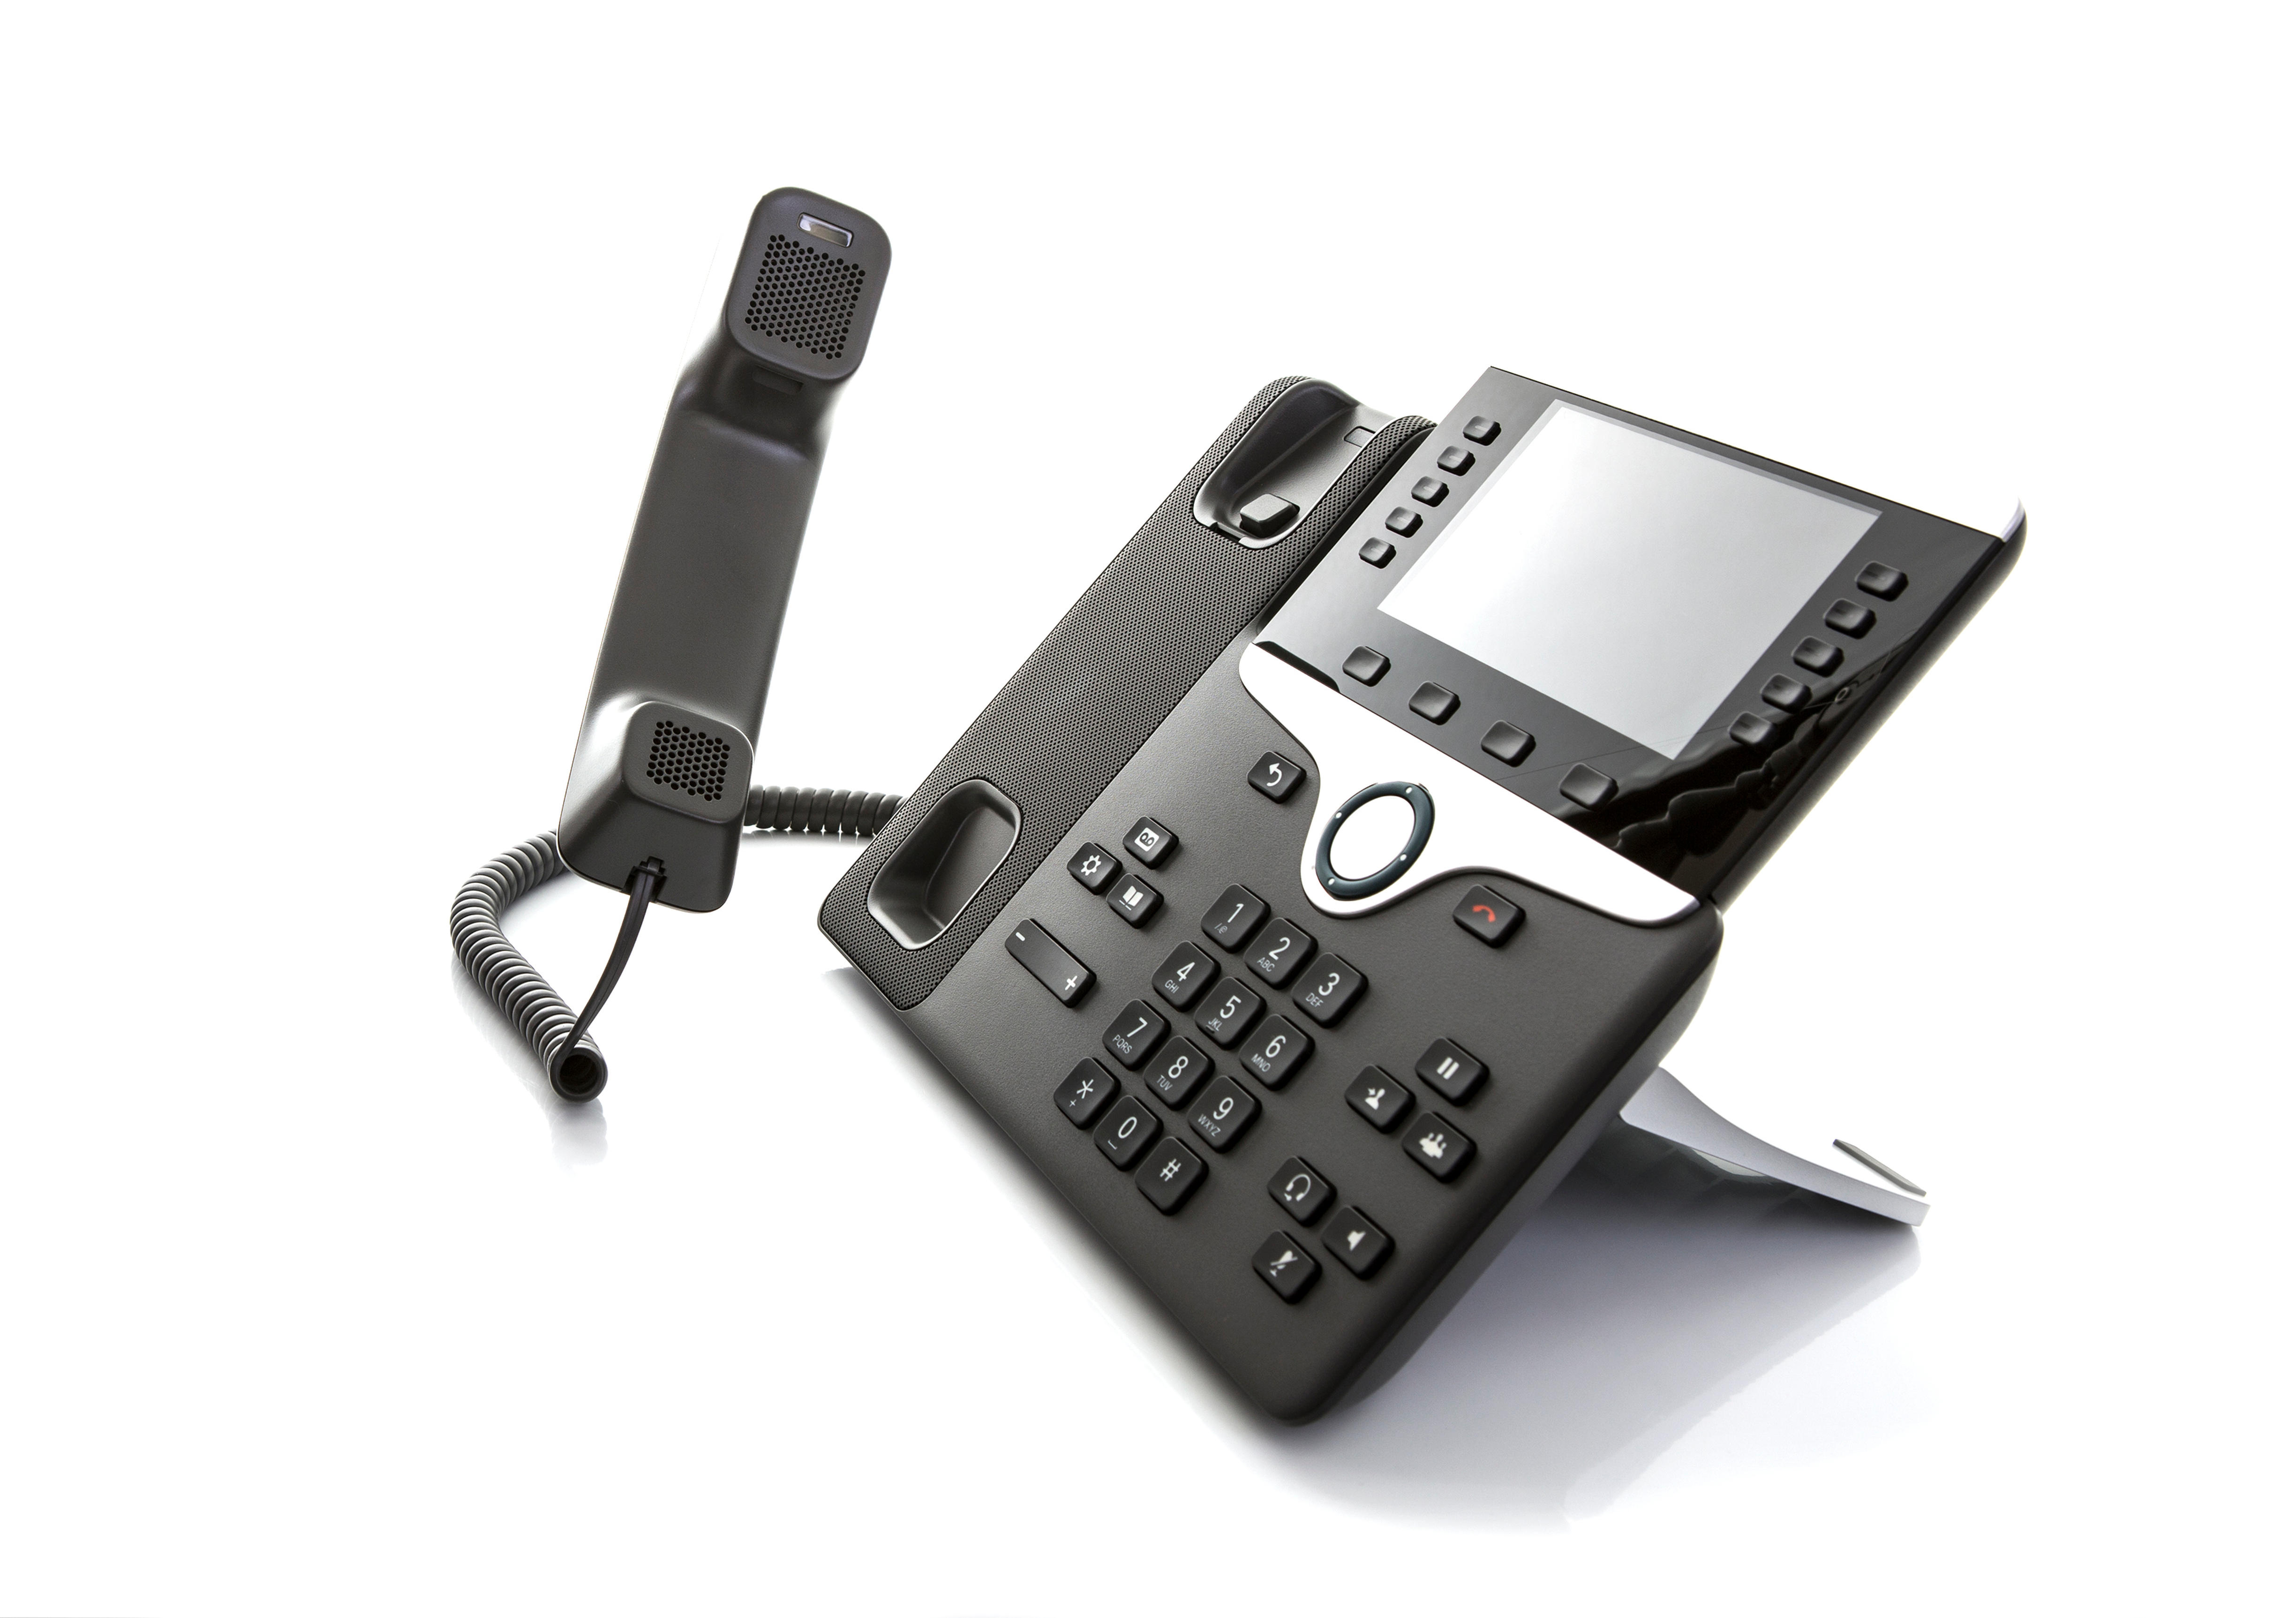 Business VOIP Phone Systems